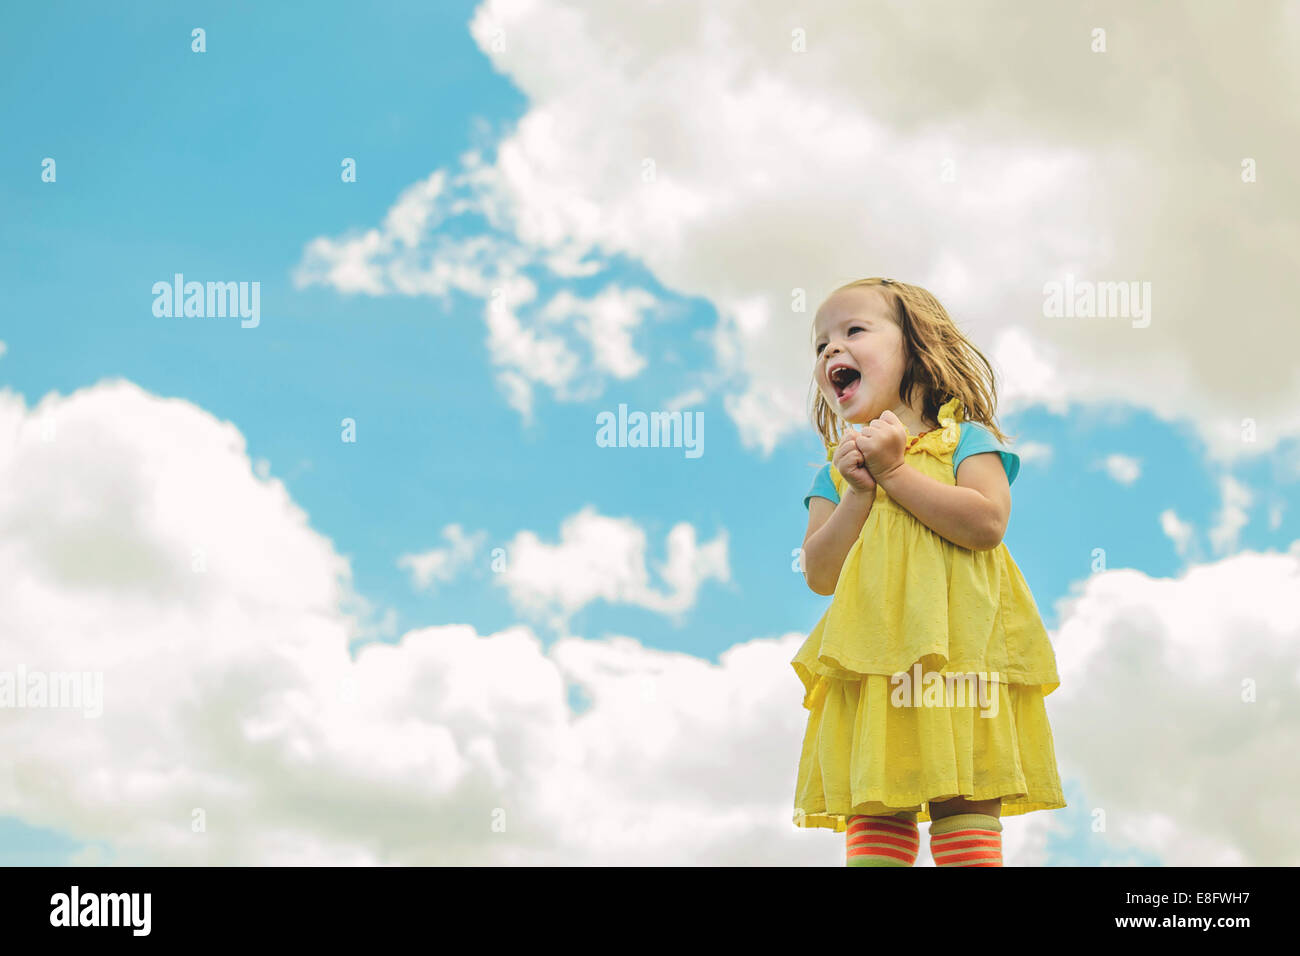 Girl (2-3) laughing with sky in background Stock Photo